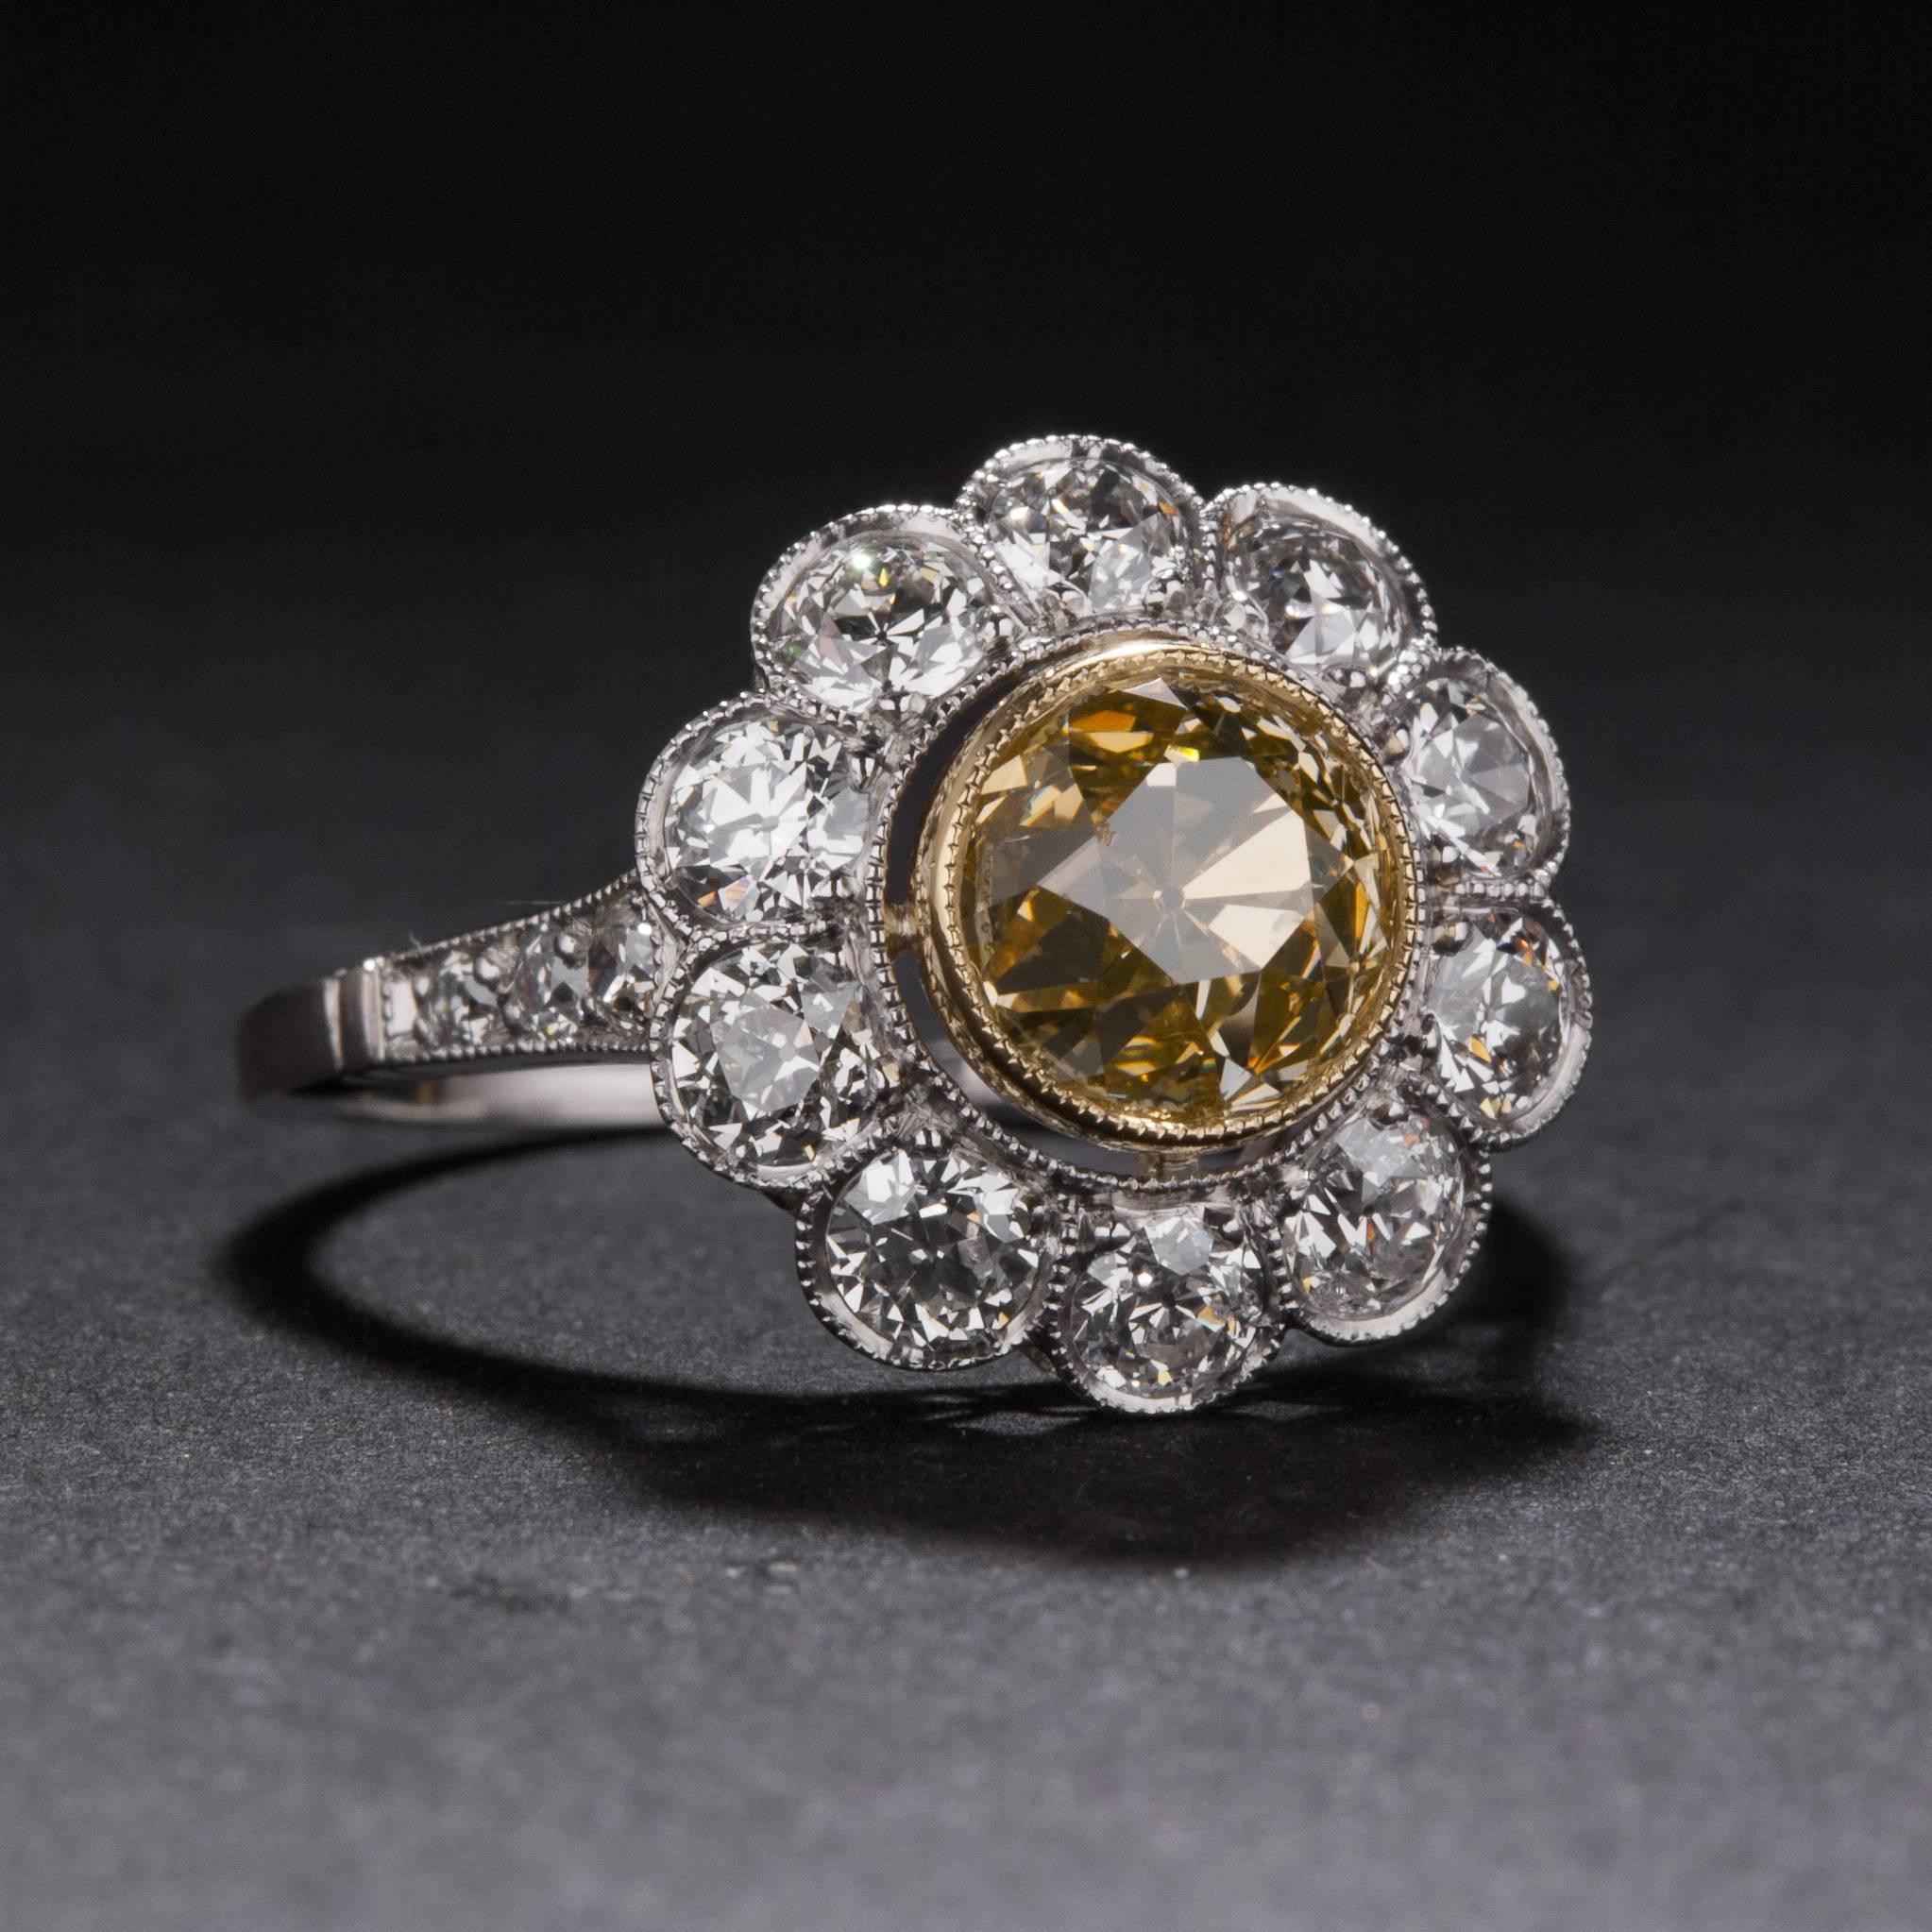 1920s Art Deco 1.64ct Fancy Yellow Diamond Ring In Excellent Condition For Sale In Carmel, CA